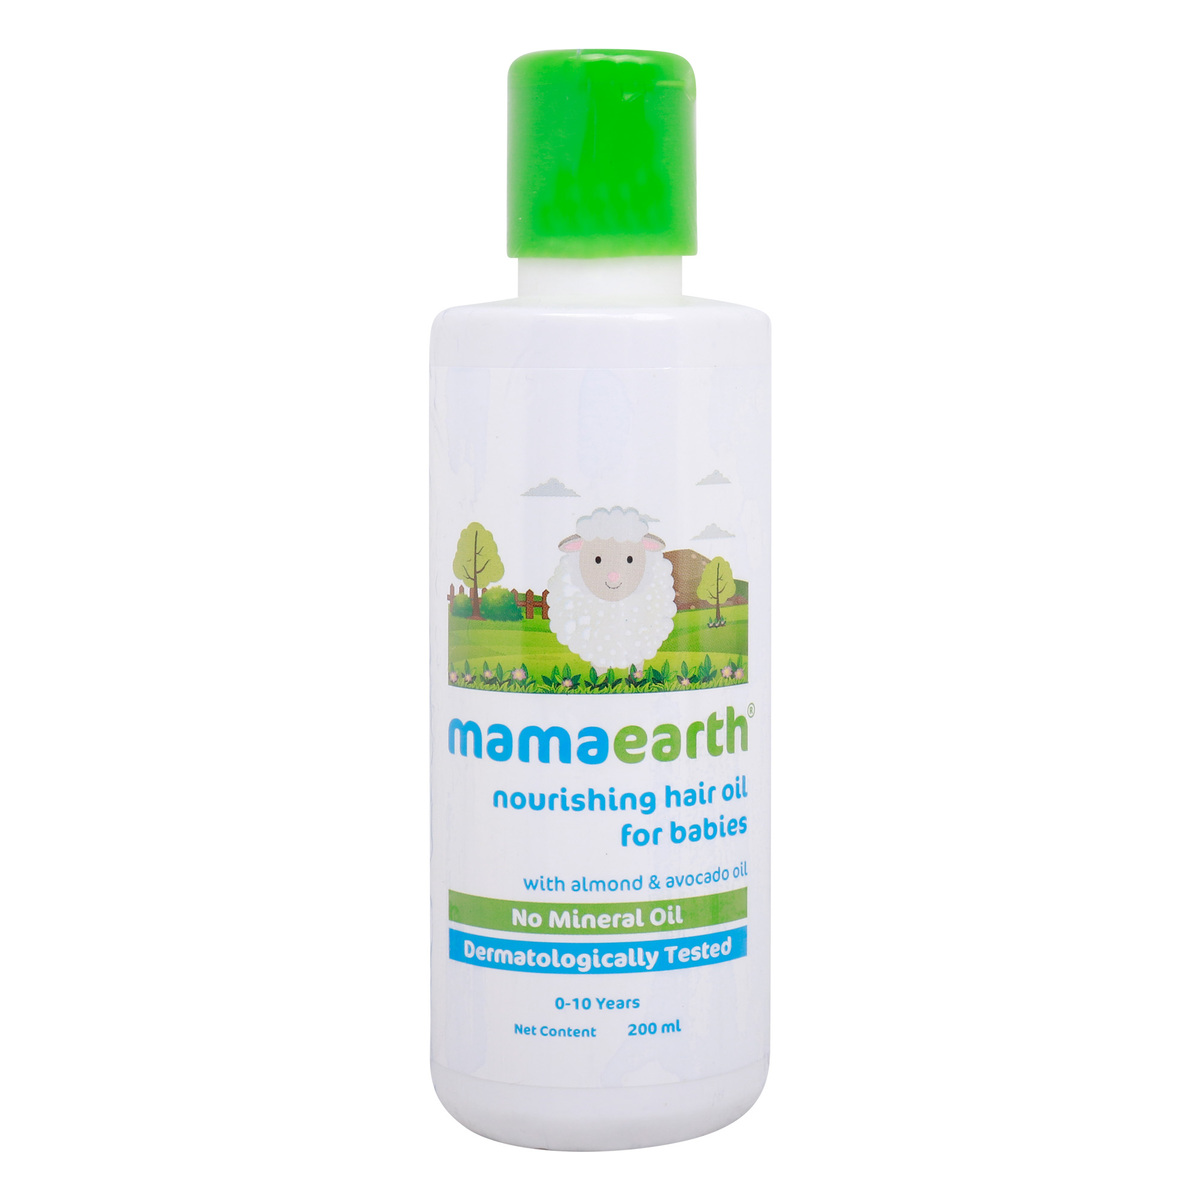 Mamaearth Nourishing Hair Oil for Babies with Almond and Avocado, 200 ml